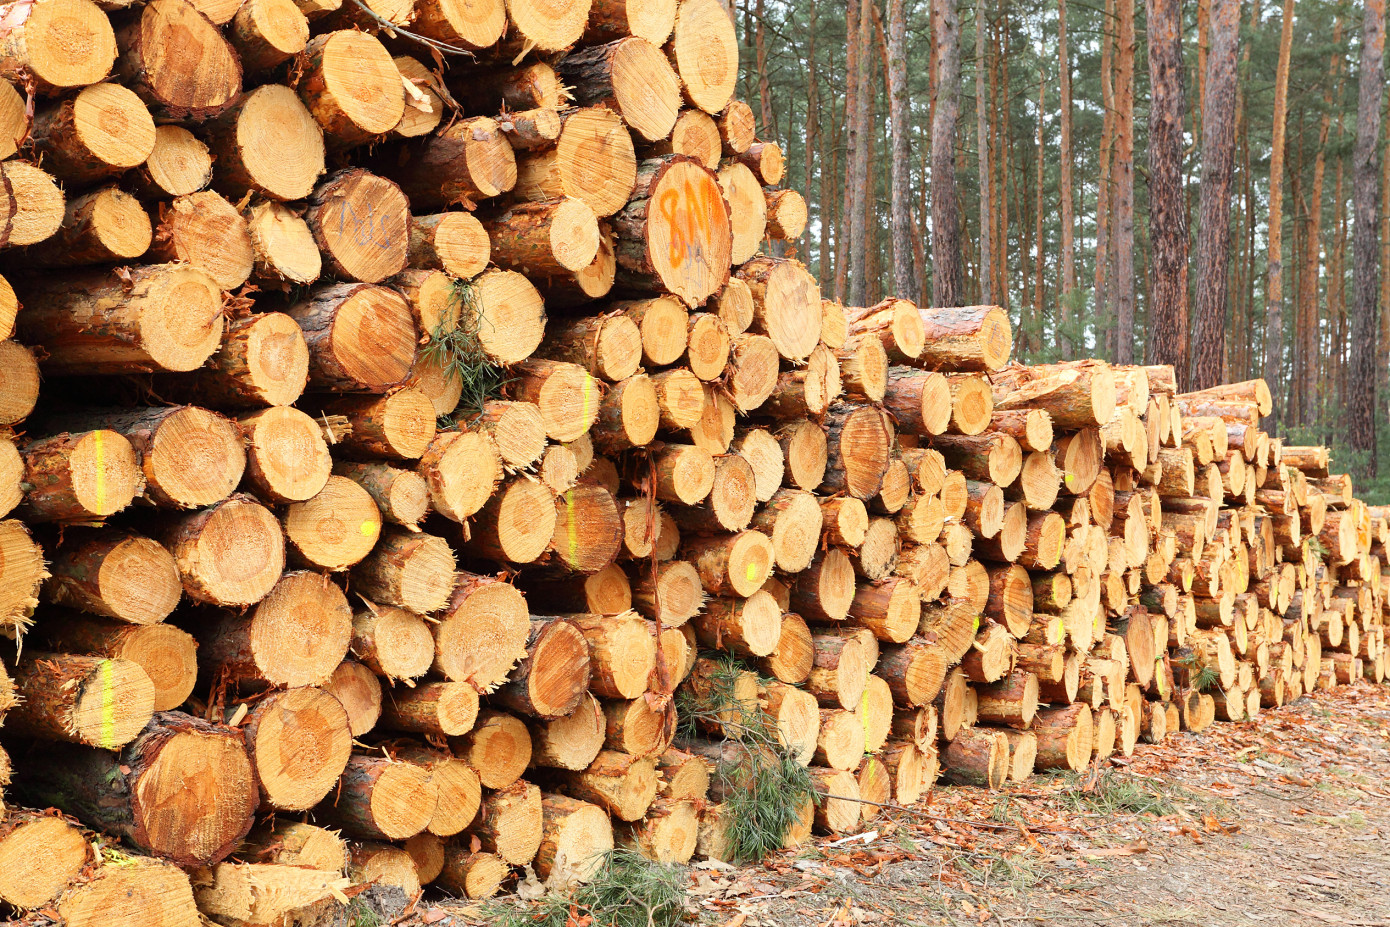 Slovenia: Value of purchased roundwood increased by 8% in January